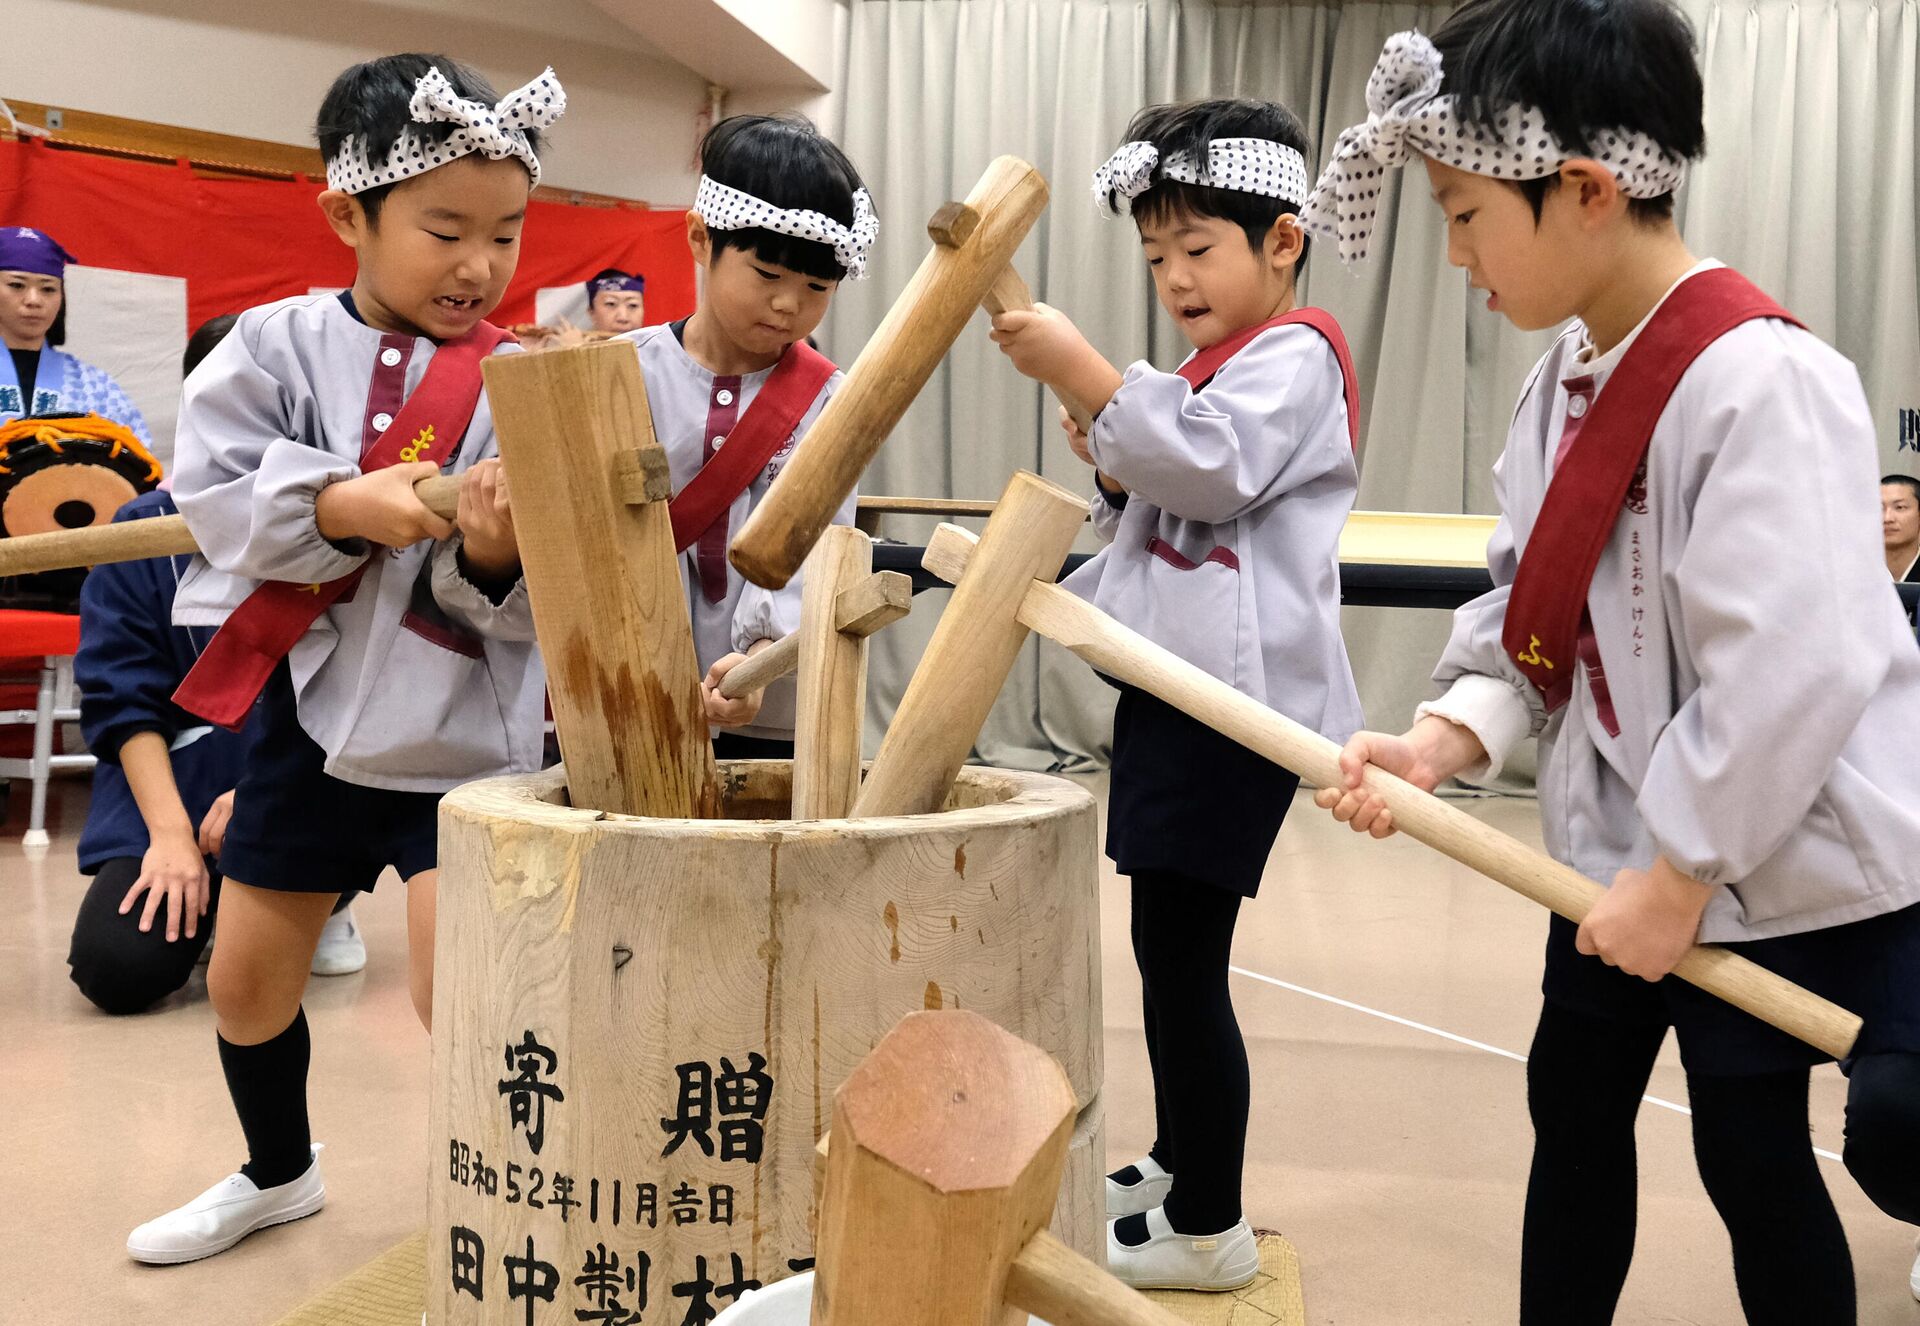 Japanese kindergarten children wearing traditional headwear use wooden hammers to pound steamed rice into a mochi rice cake during the annual mochi-tsuki event to celebrate the New Year at a kindergarten in Tokyo on December 6, 2018. (Photo by Kazuhiro NOGI / AFP) - Sputnik International, 1920, 24.12.2022